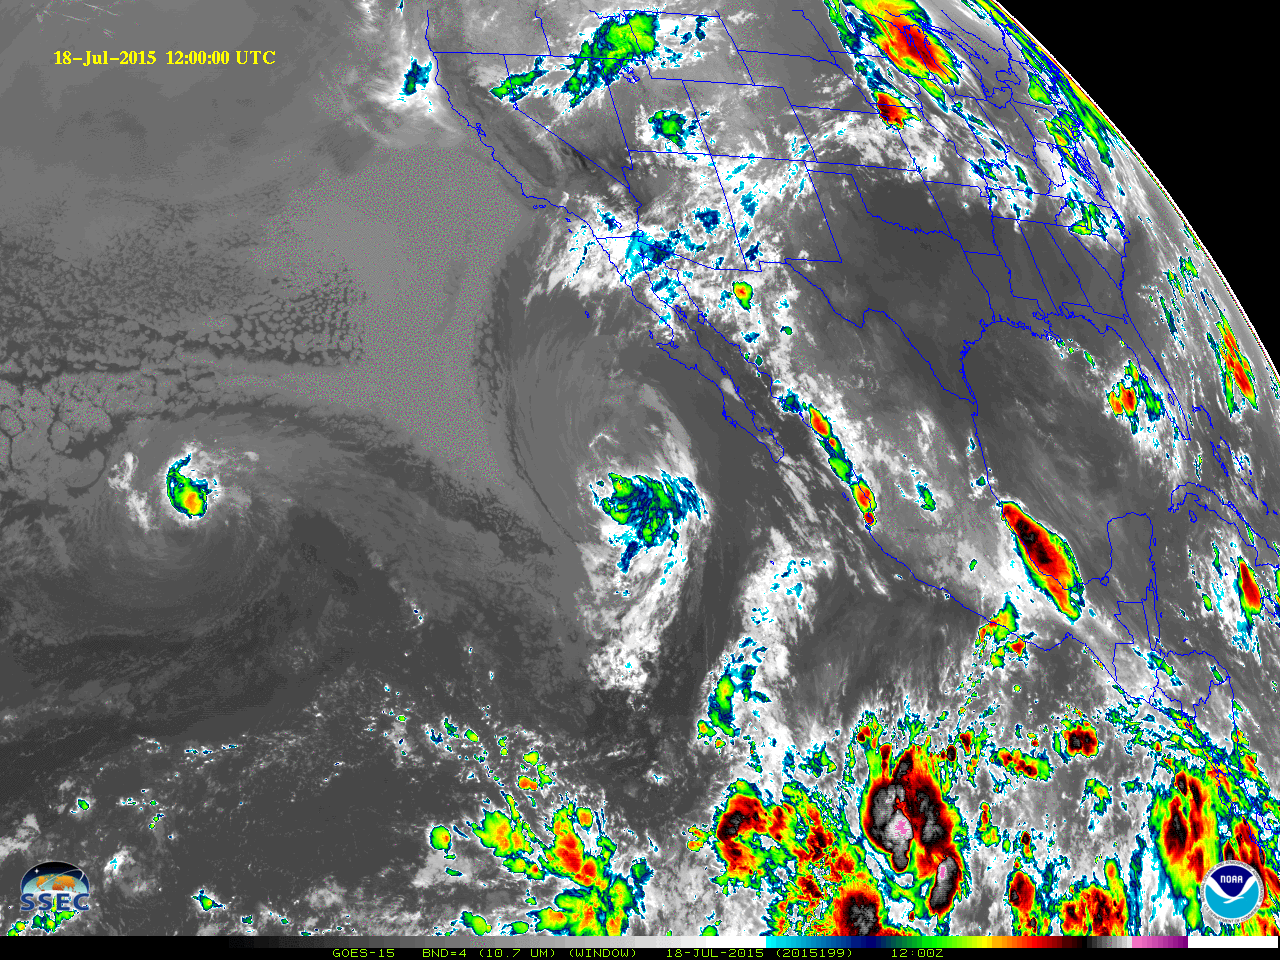 GOES-15 Infrared (10.7 µm) Images  (click to play animation)